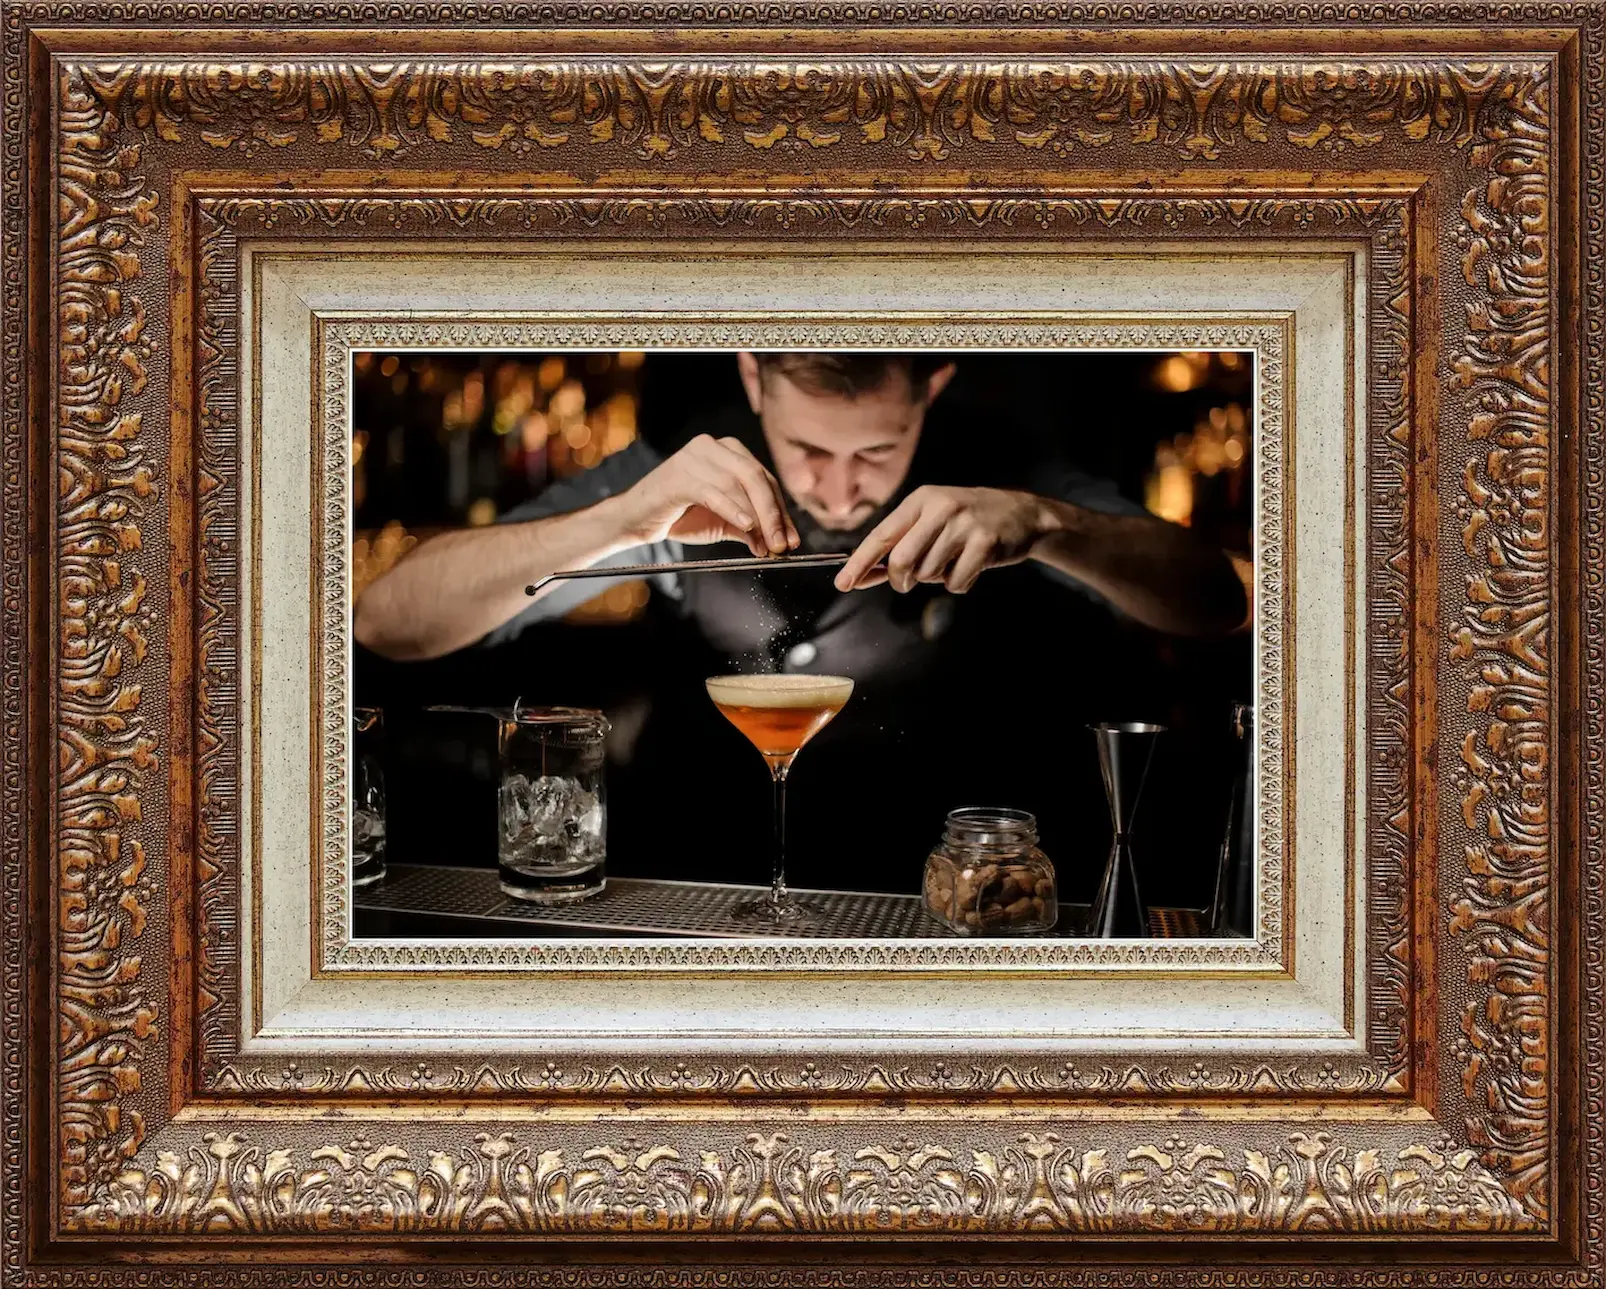 Image of bartender adding finishing touches to a mocktail